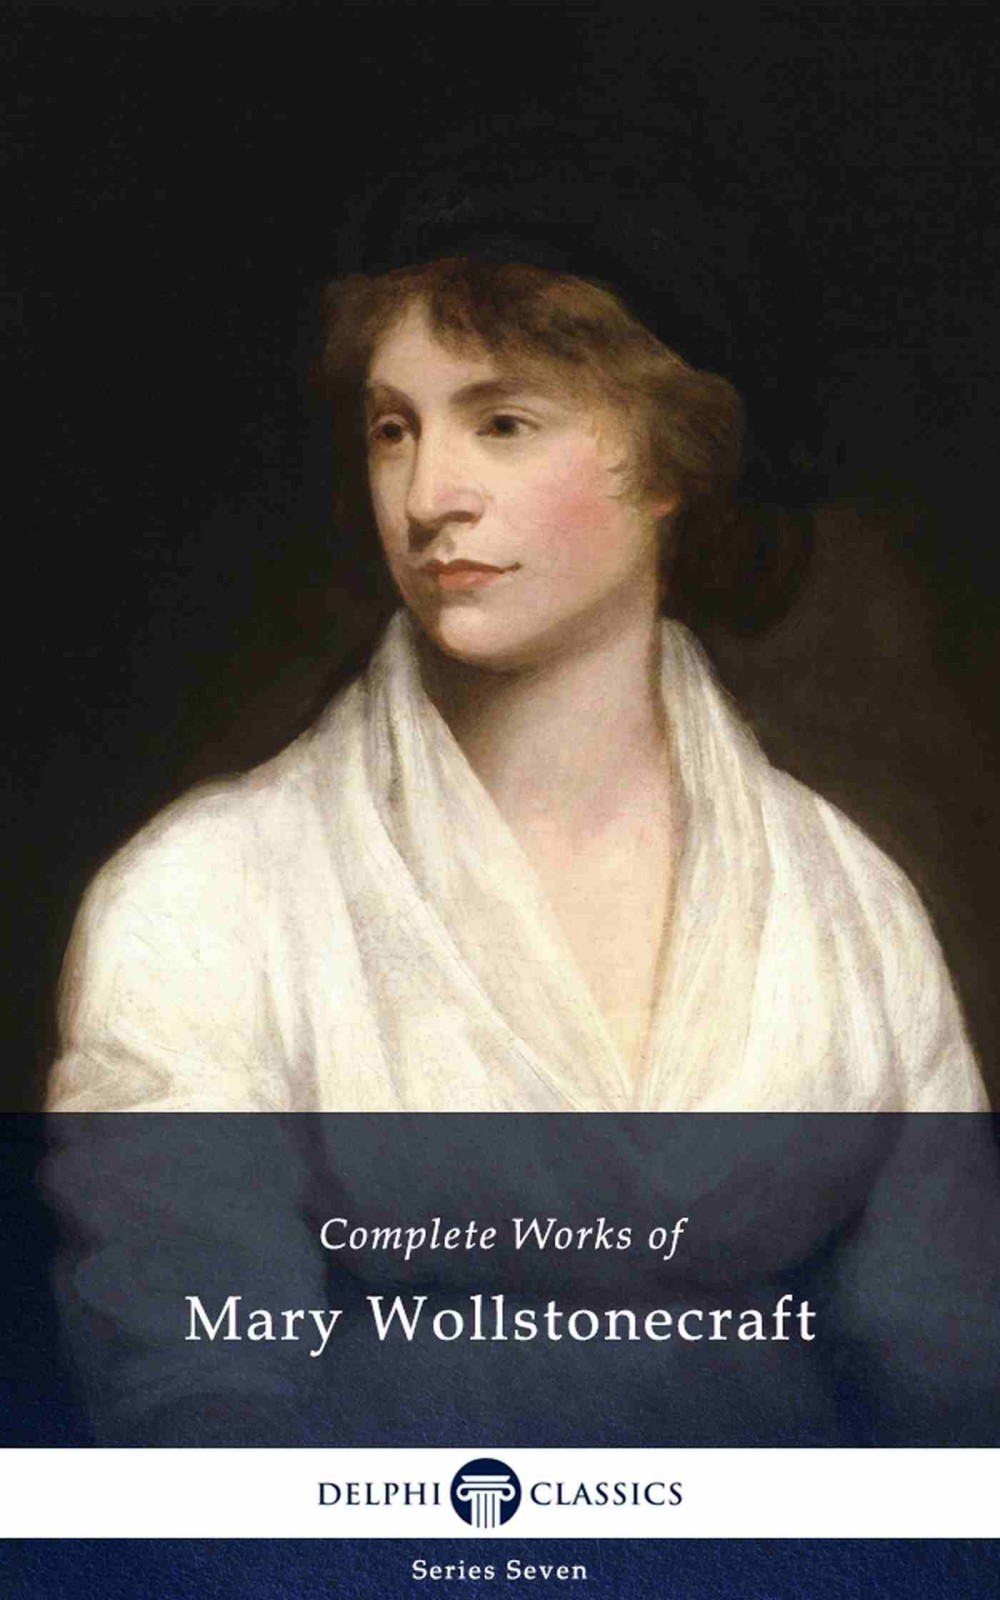 Delphi Complete Works of Mary Wollstonecraft (Illustrated)